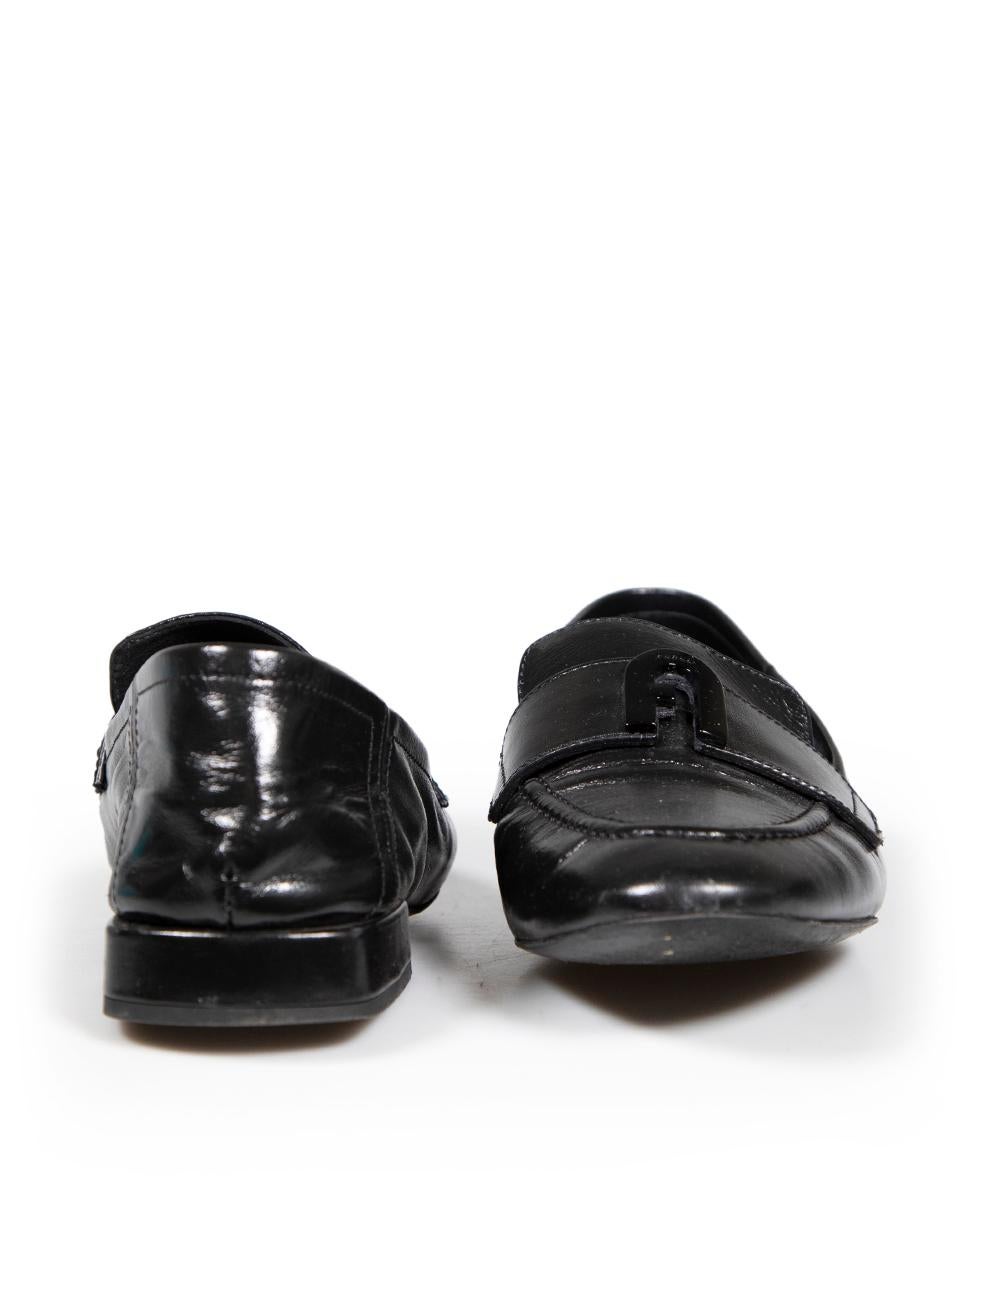 Furla Black Leather High Shine Buckle Loafers Size IT 40 In Good Condition For Sale In London, GB